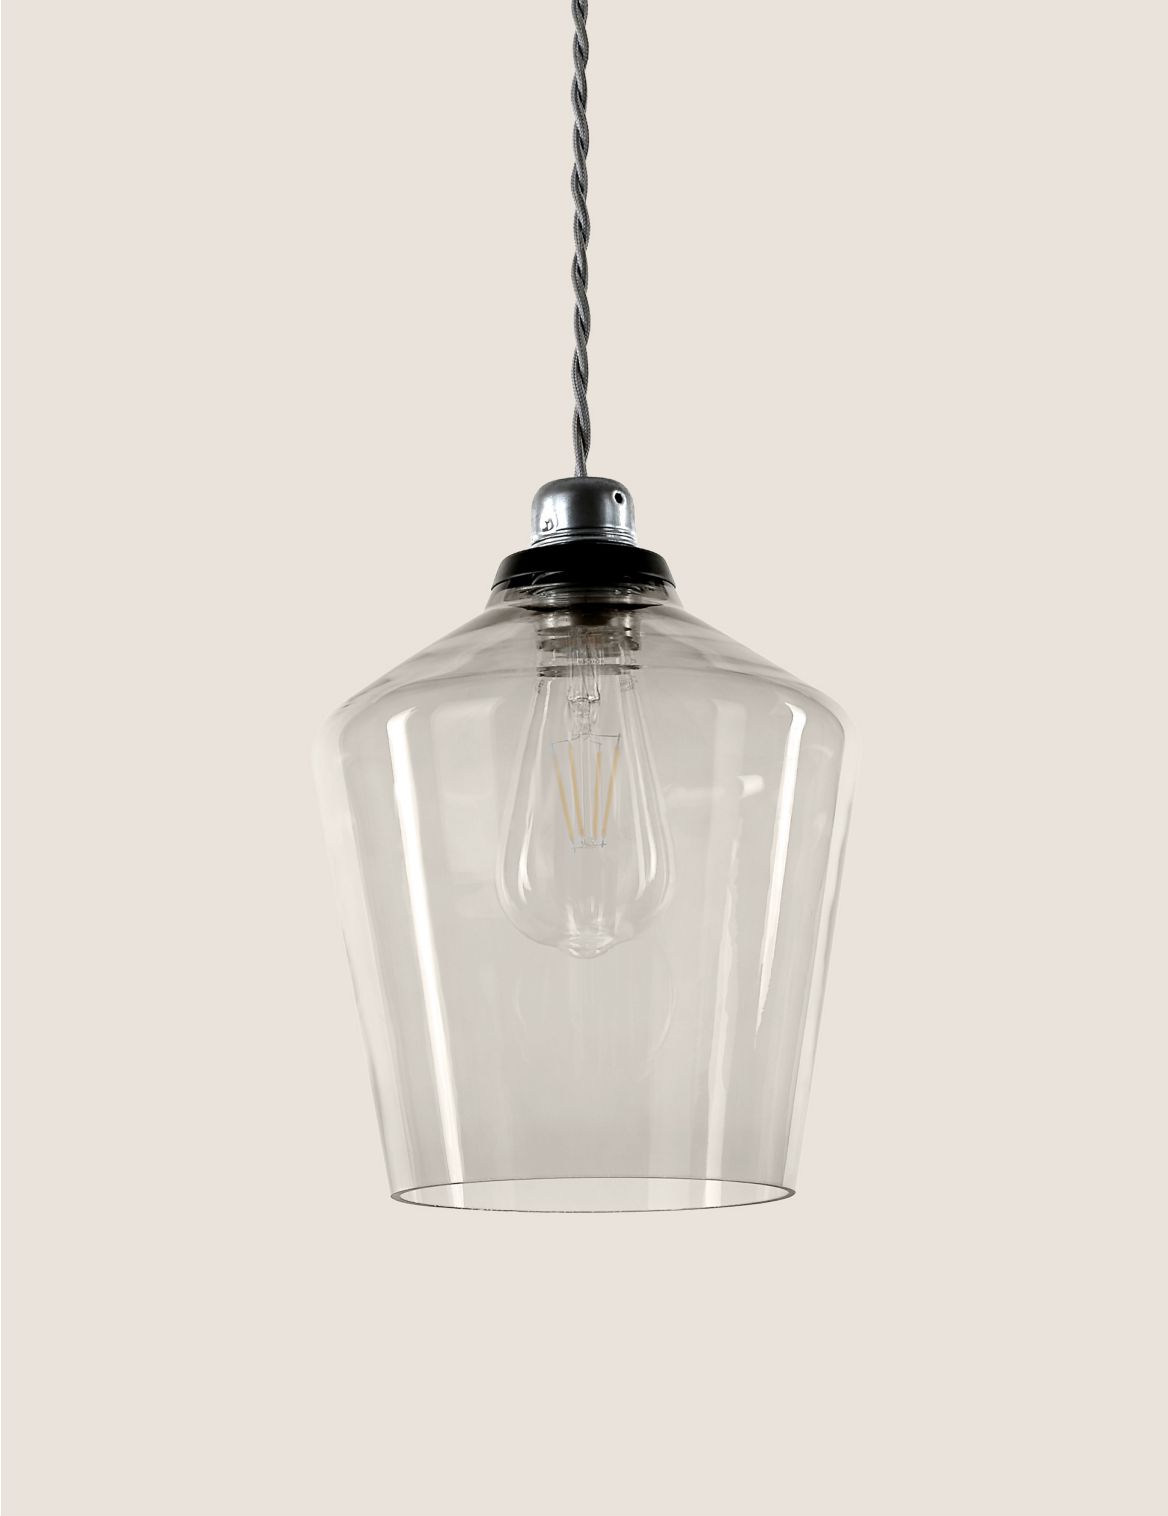 Claudia Glass Easy Fit Ceiling Light grey